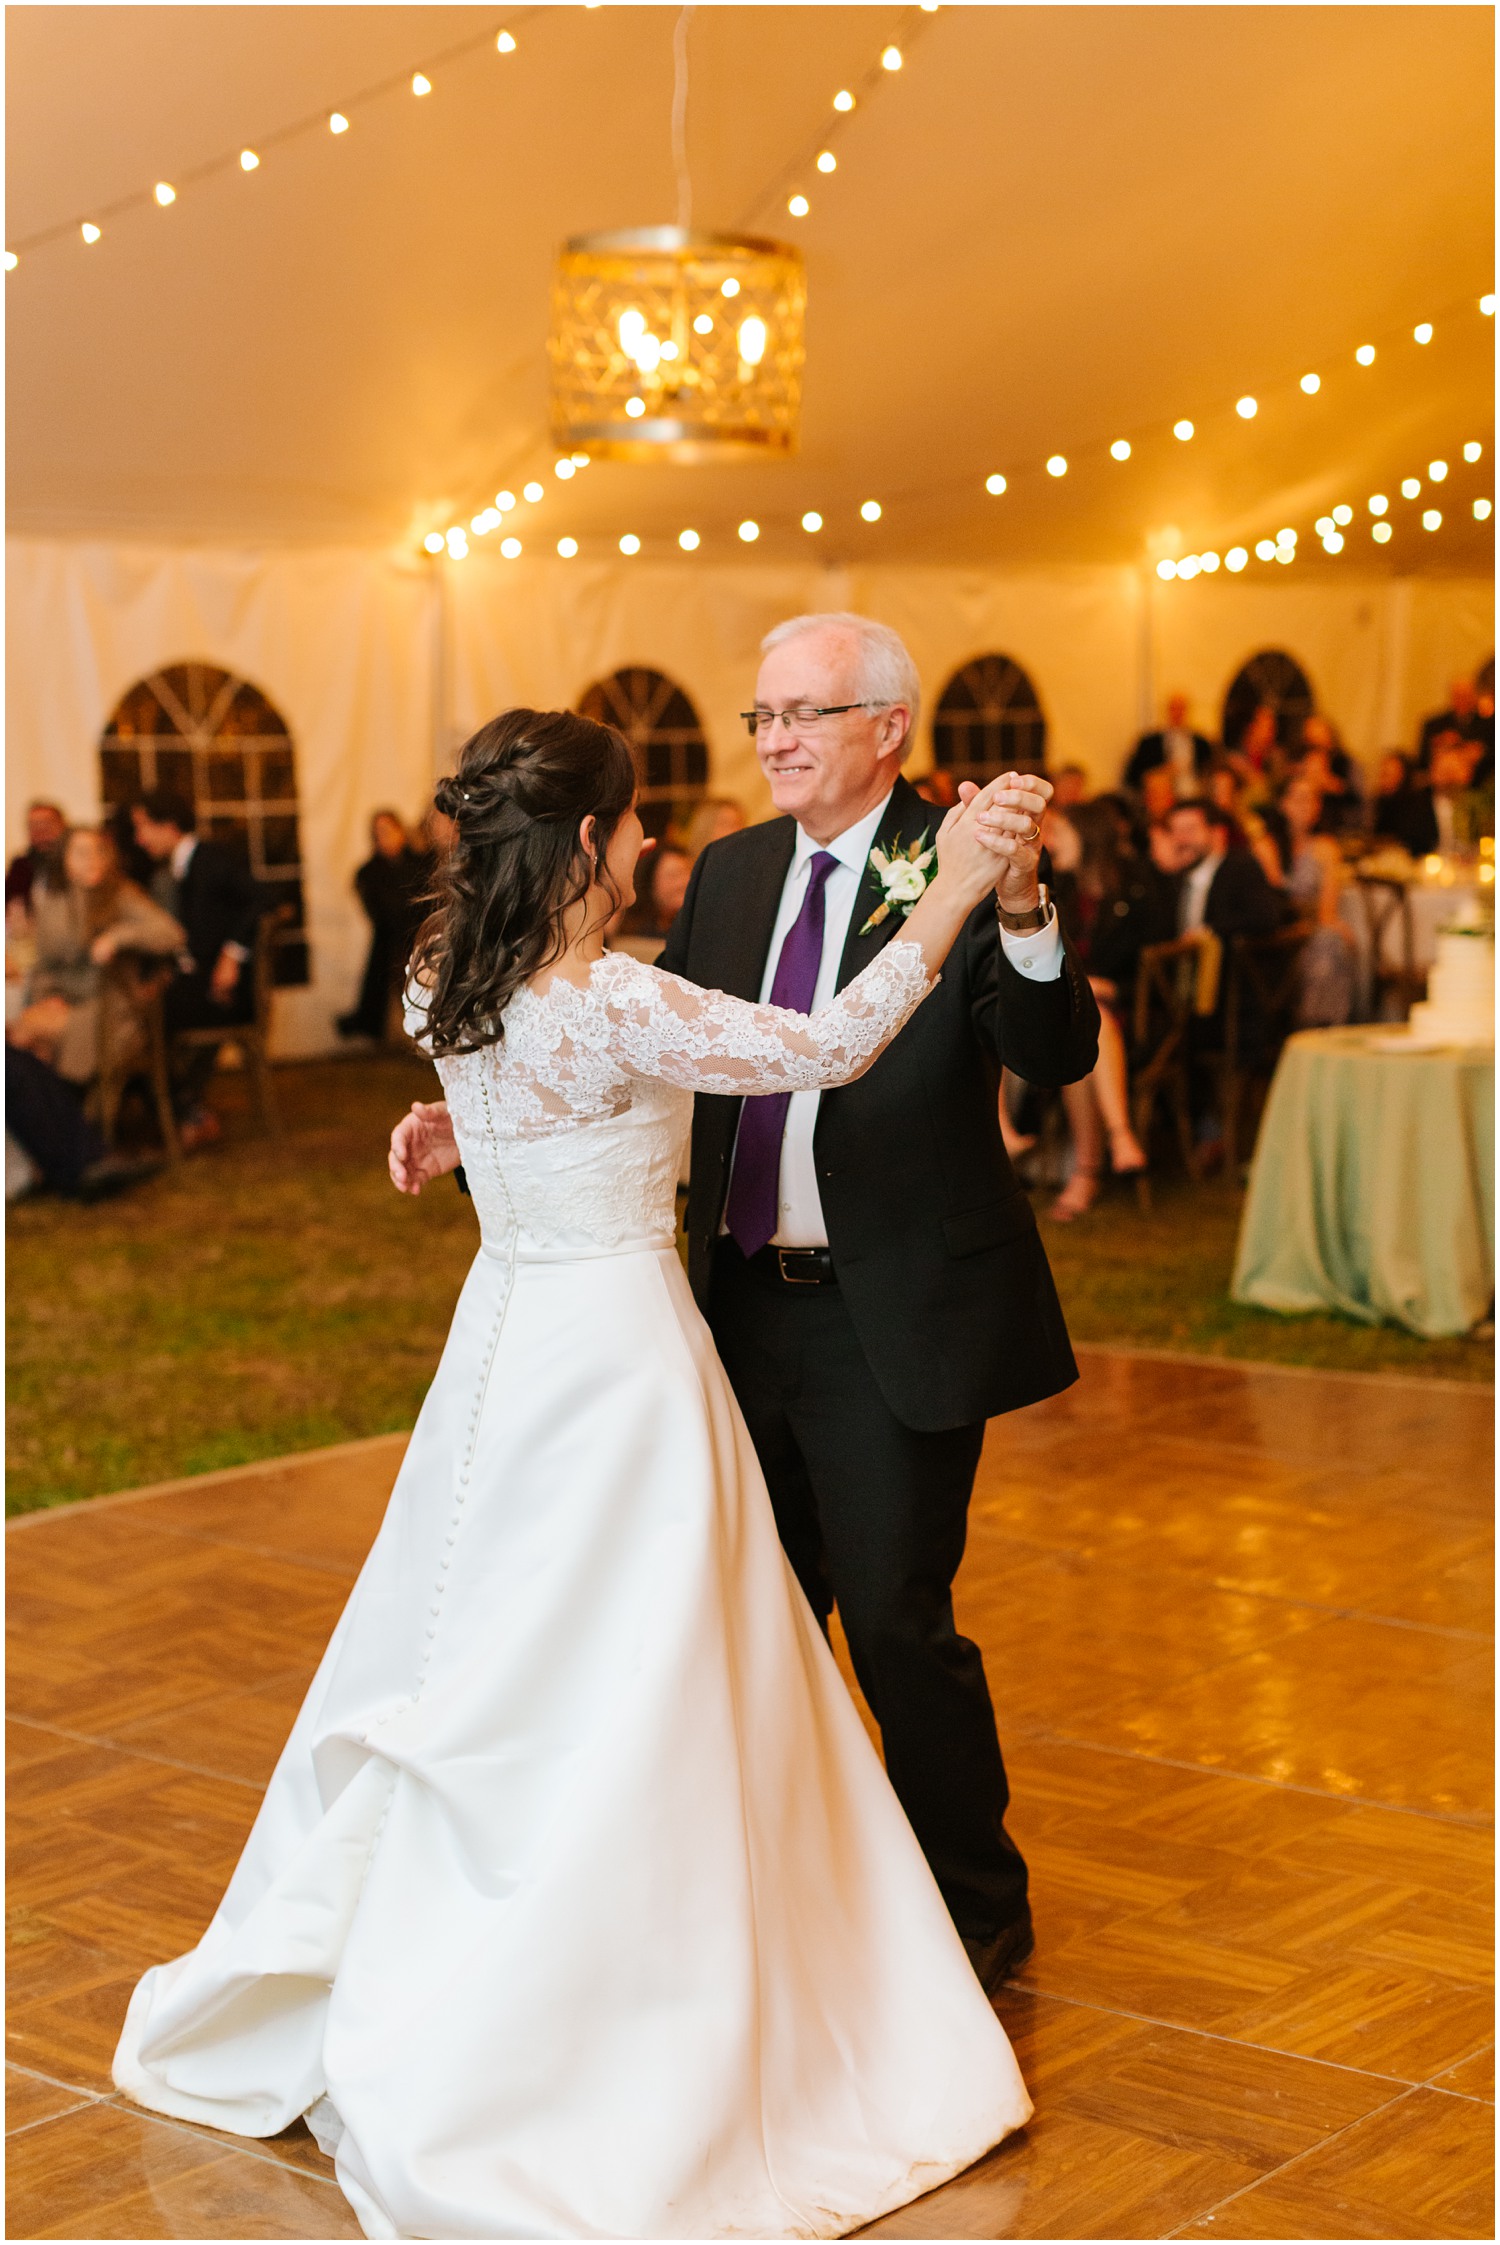 Lake Eden Events wedding reception dances with father and daughter